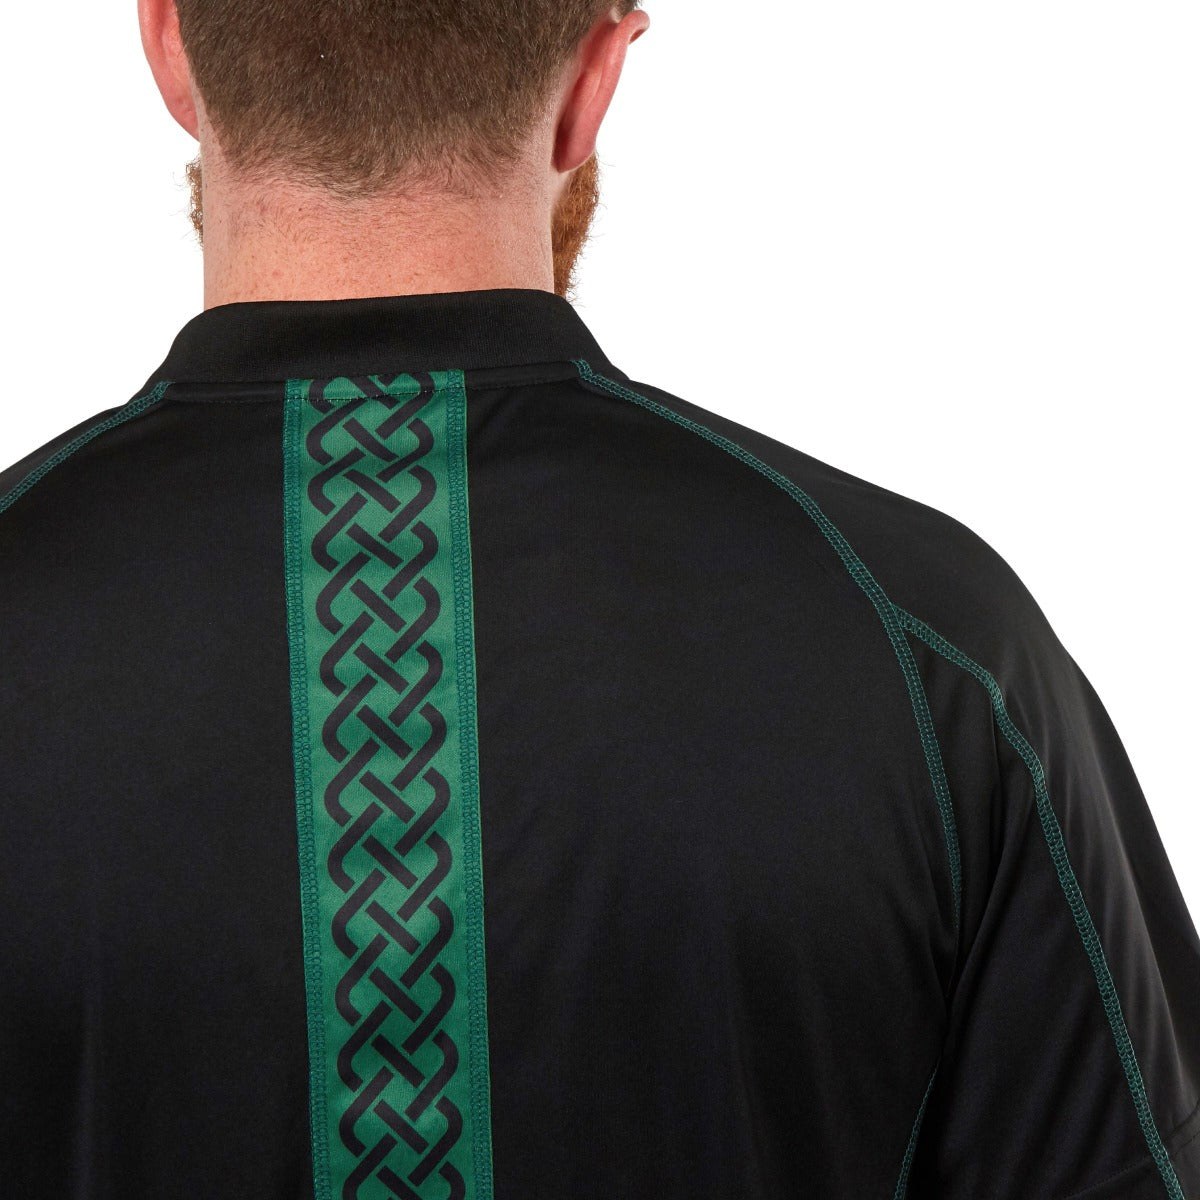 The back of a man wearing a Guinness Black & Green Short Sleeve Rugby Jersey.